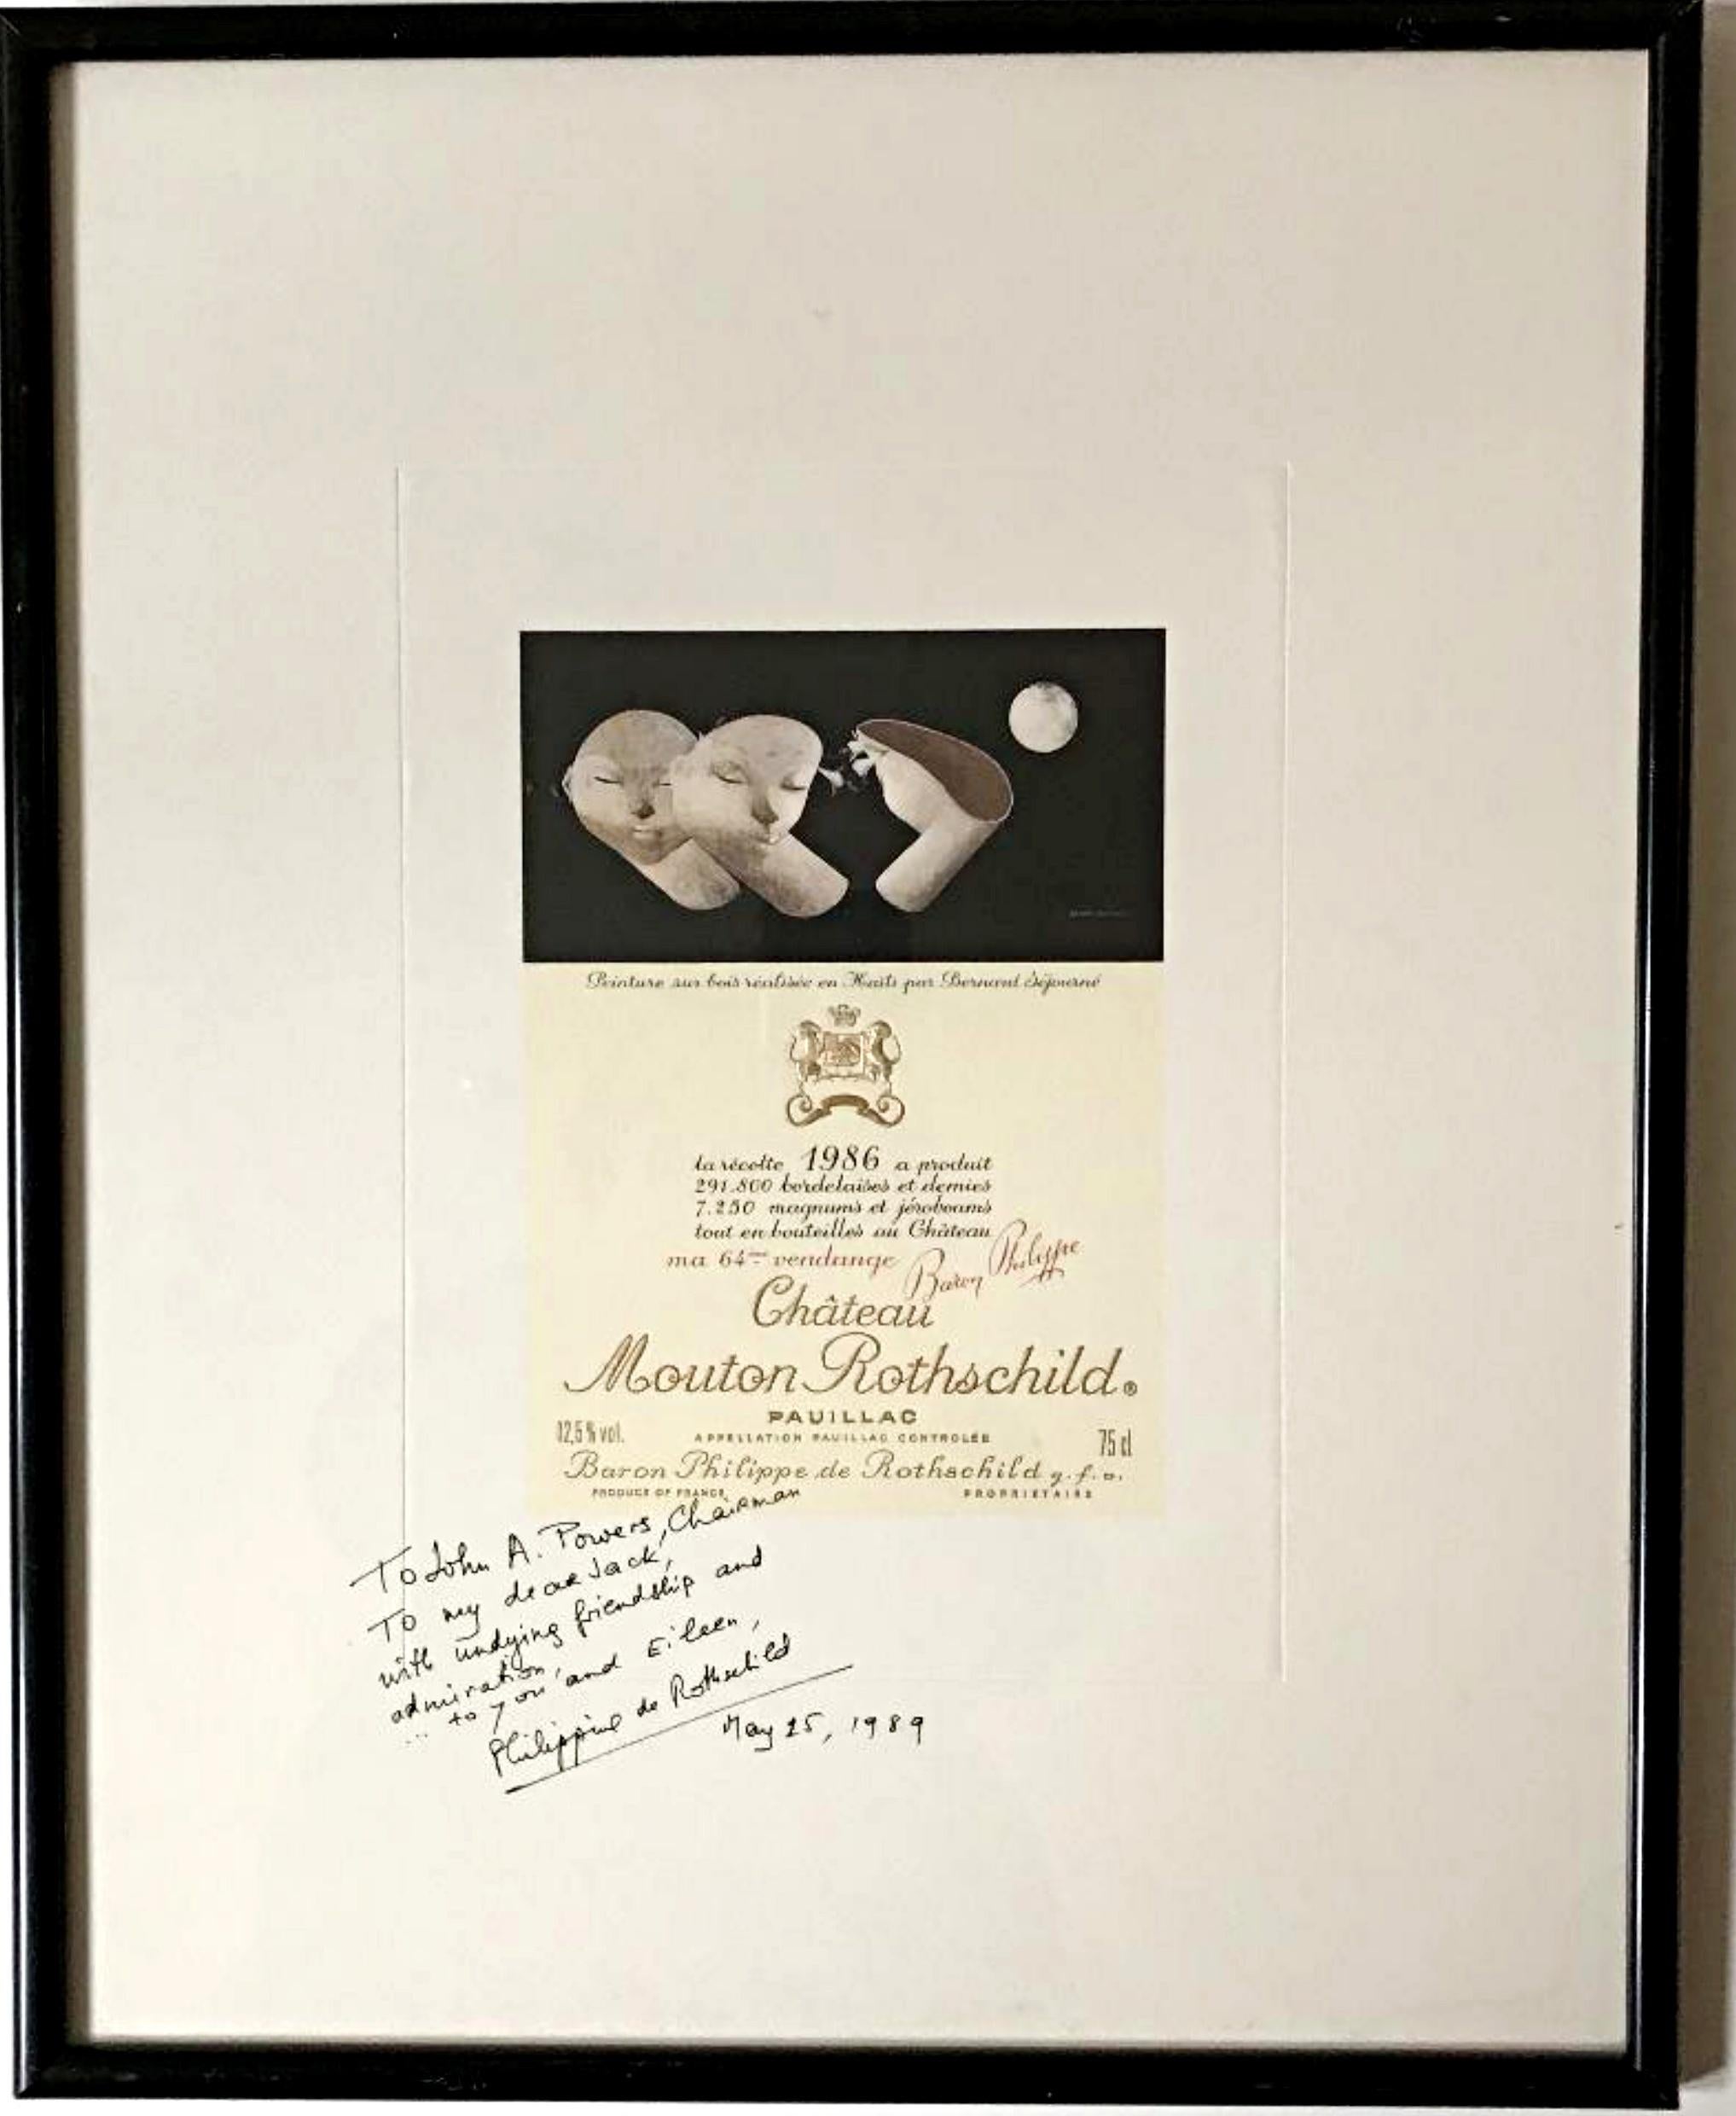 Bernard Séjourné
Chateau Mouton Rothschild Wine Label (Hand Signed & Inscribed), 1989
Wine Label Print 
Signed “To John A. Powers, Chairman, To my dear Jack, with undying friendship and admiration… to you and Eileen, Philippine de Rothschild.”
Held